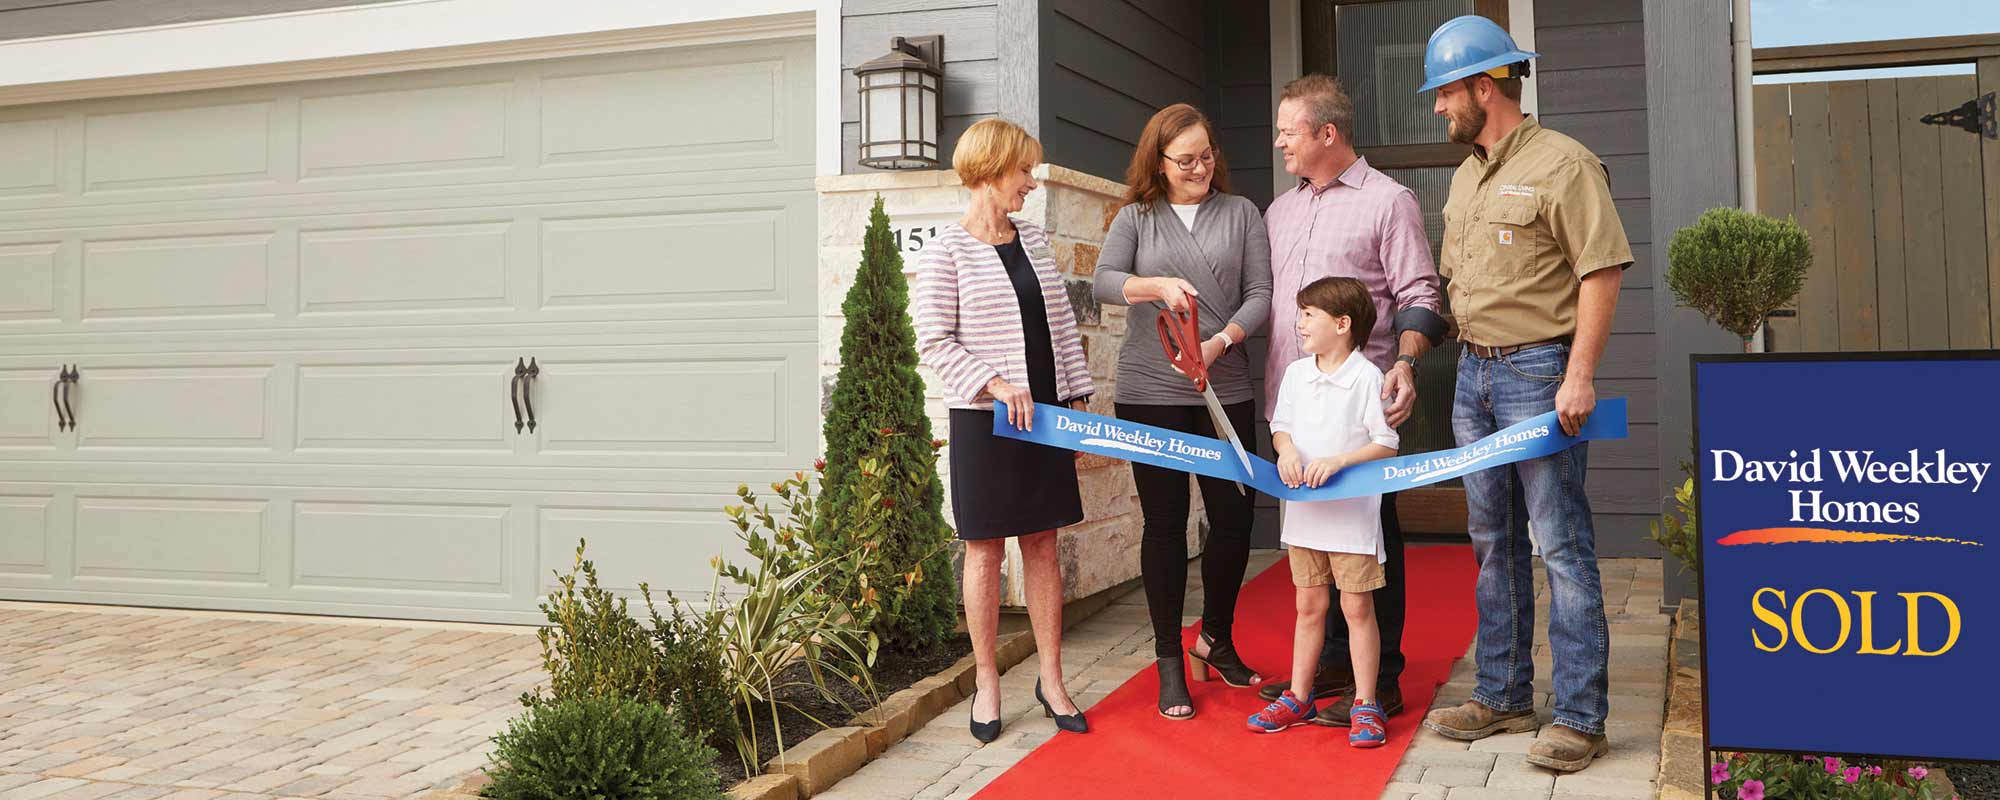 A David Weekley Homes Sales Consultant and Person Builder welcoming a family to their new home